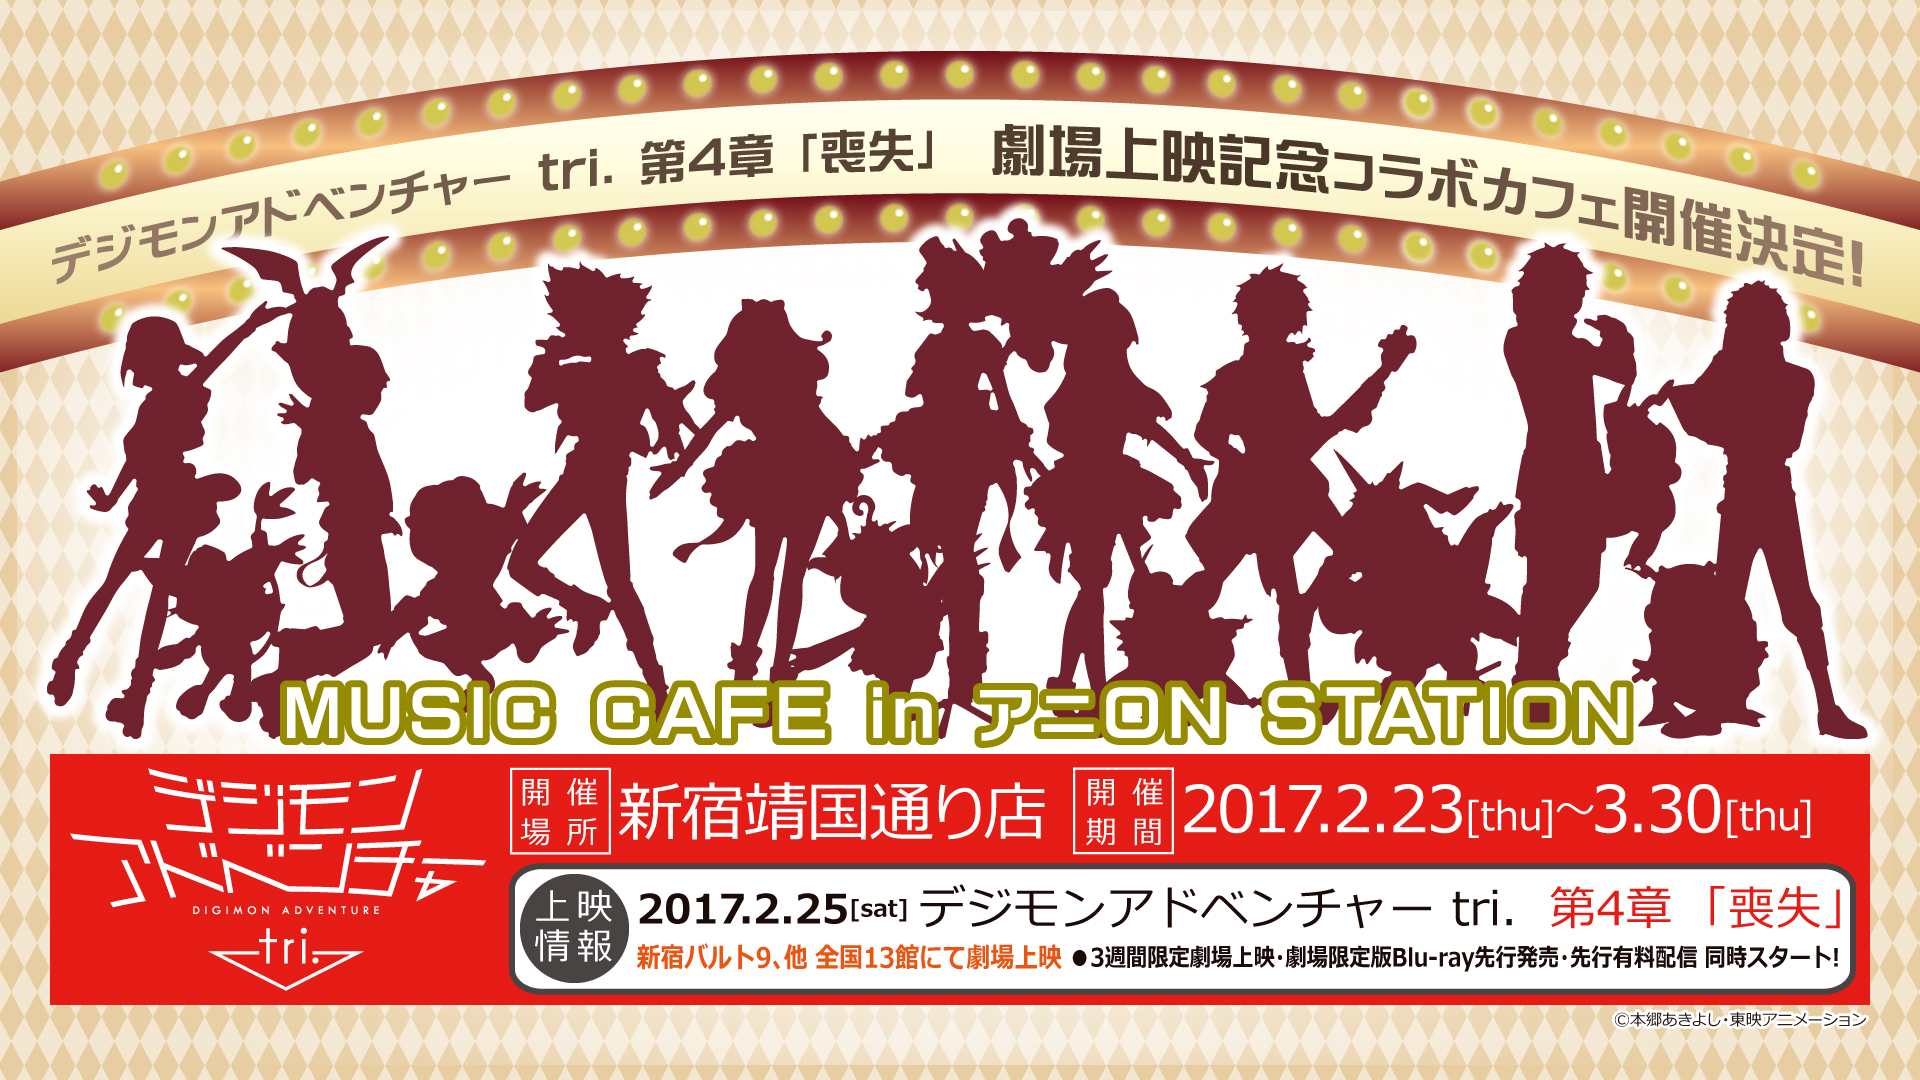 tri. Music Cafe Opening to Celebrate tri. part 4's Release